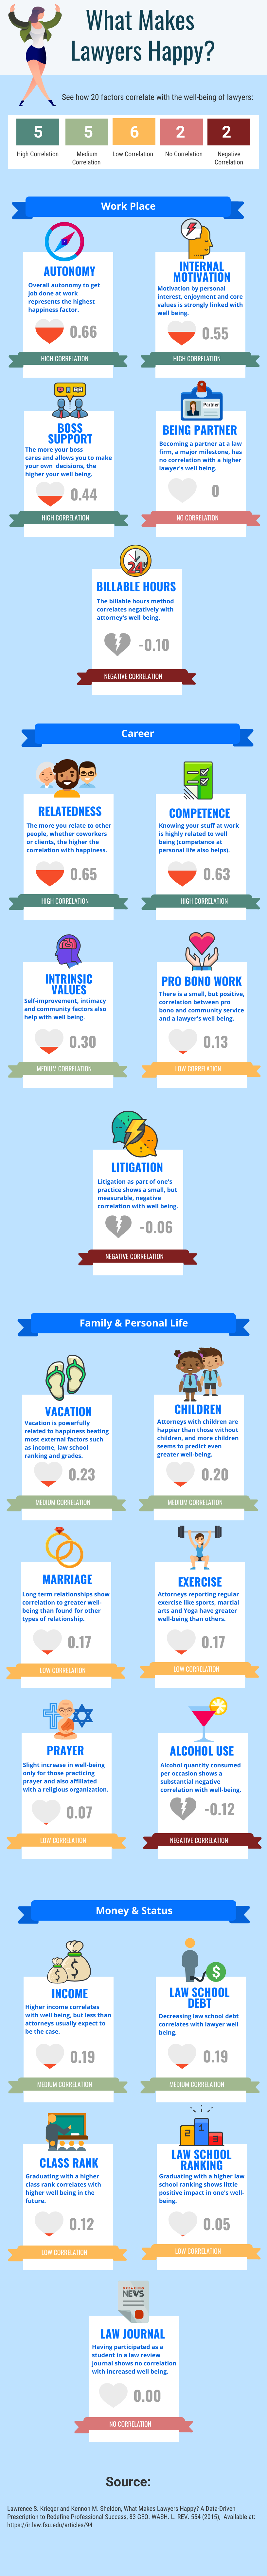 What Makes Lawyers Happy - Infographic